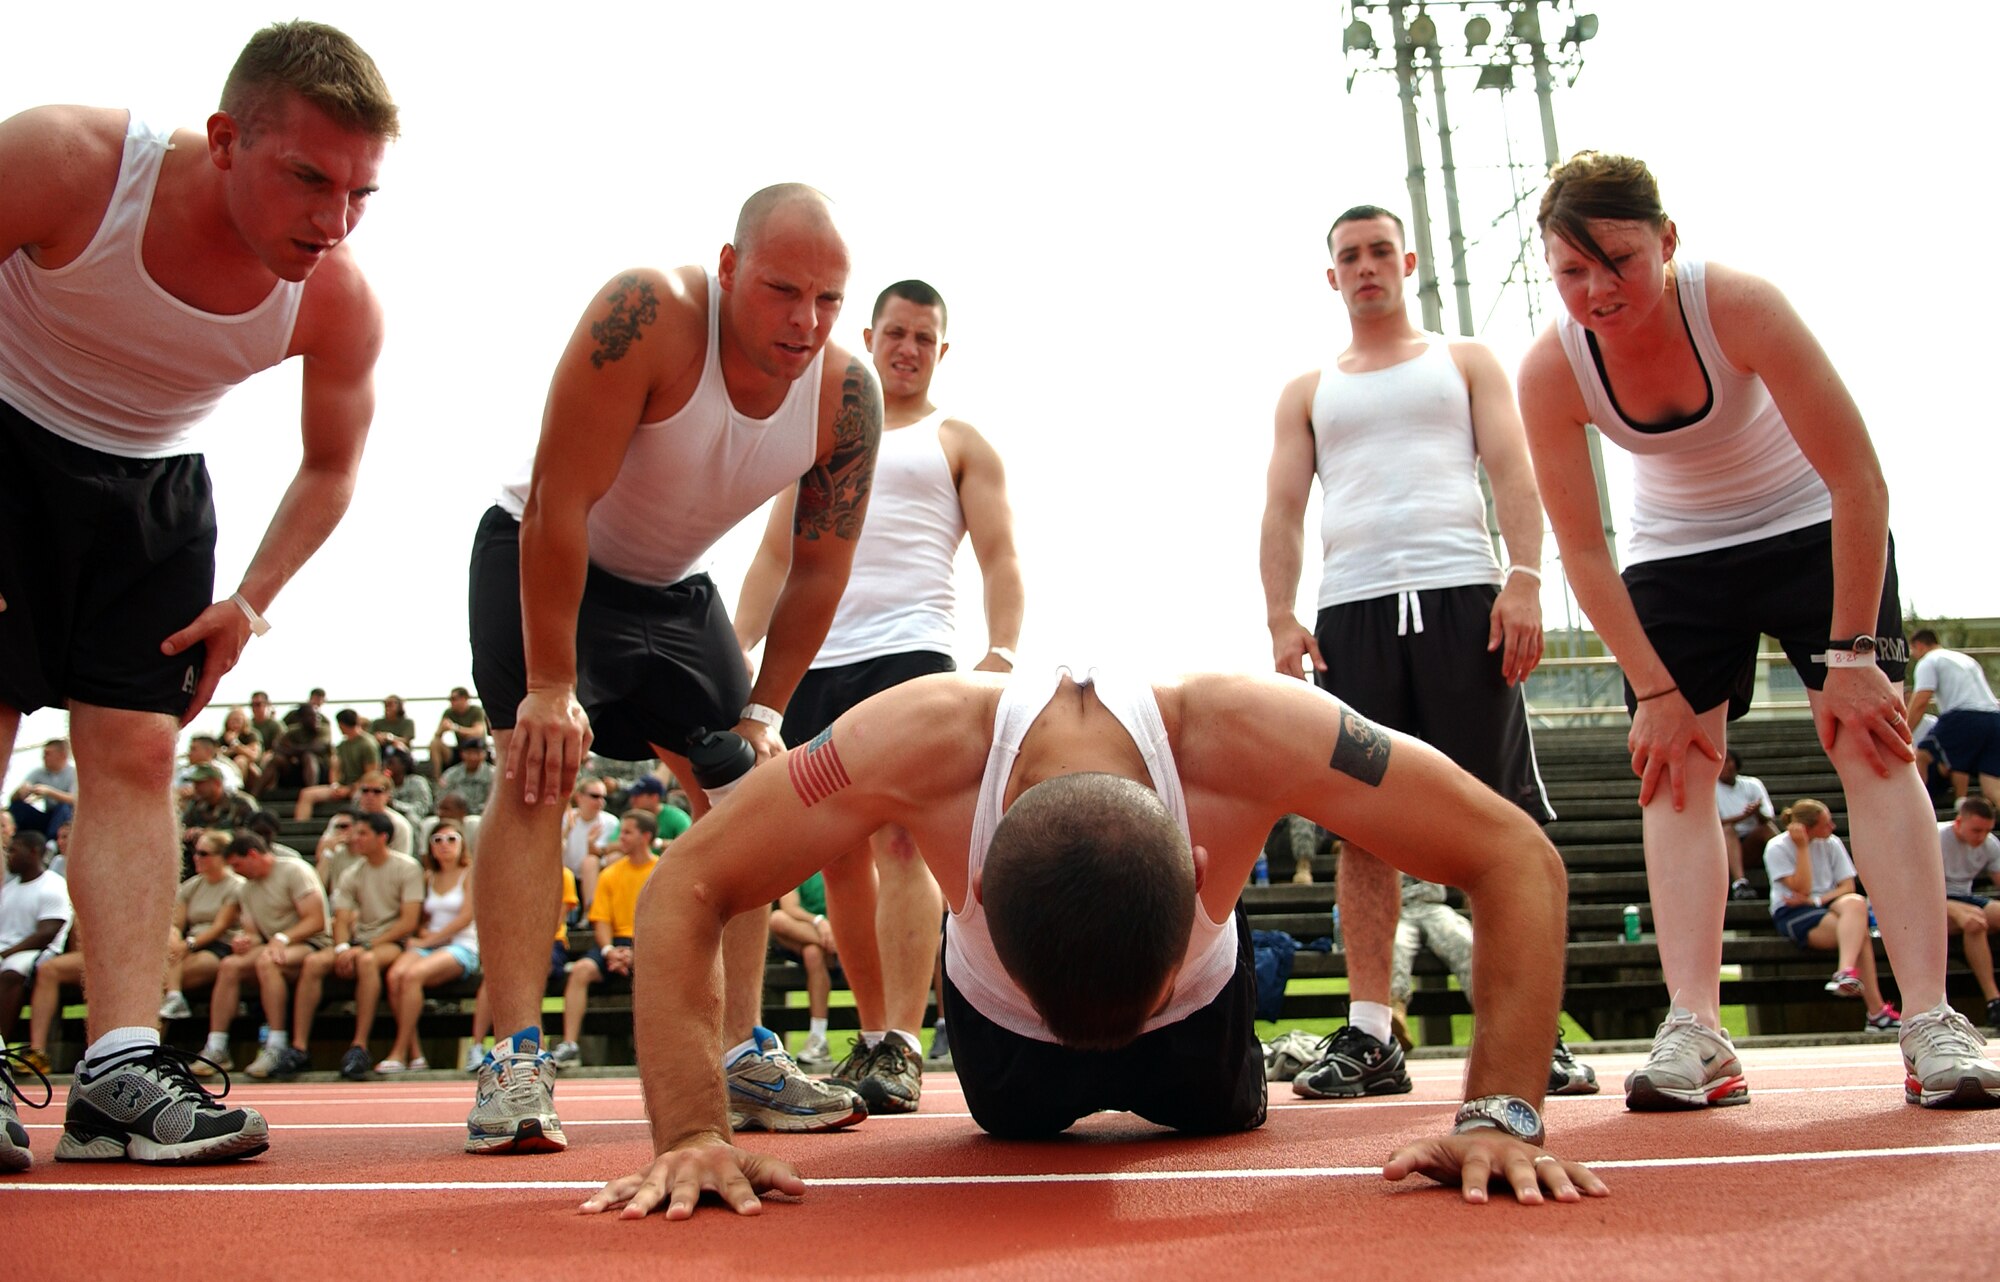 Army soldiers root for one of their own during a push-up competition in the Battle of the Services Fitness Challenge 2009 at Kadena Air Base, Japan June 26.
(U.S. Air Force photo/Tech. Sgt. Rey Ramon)  